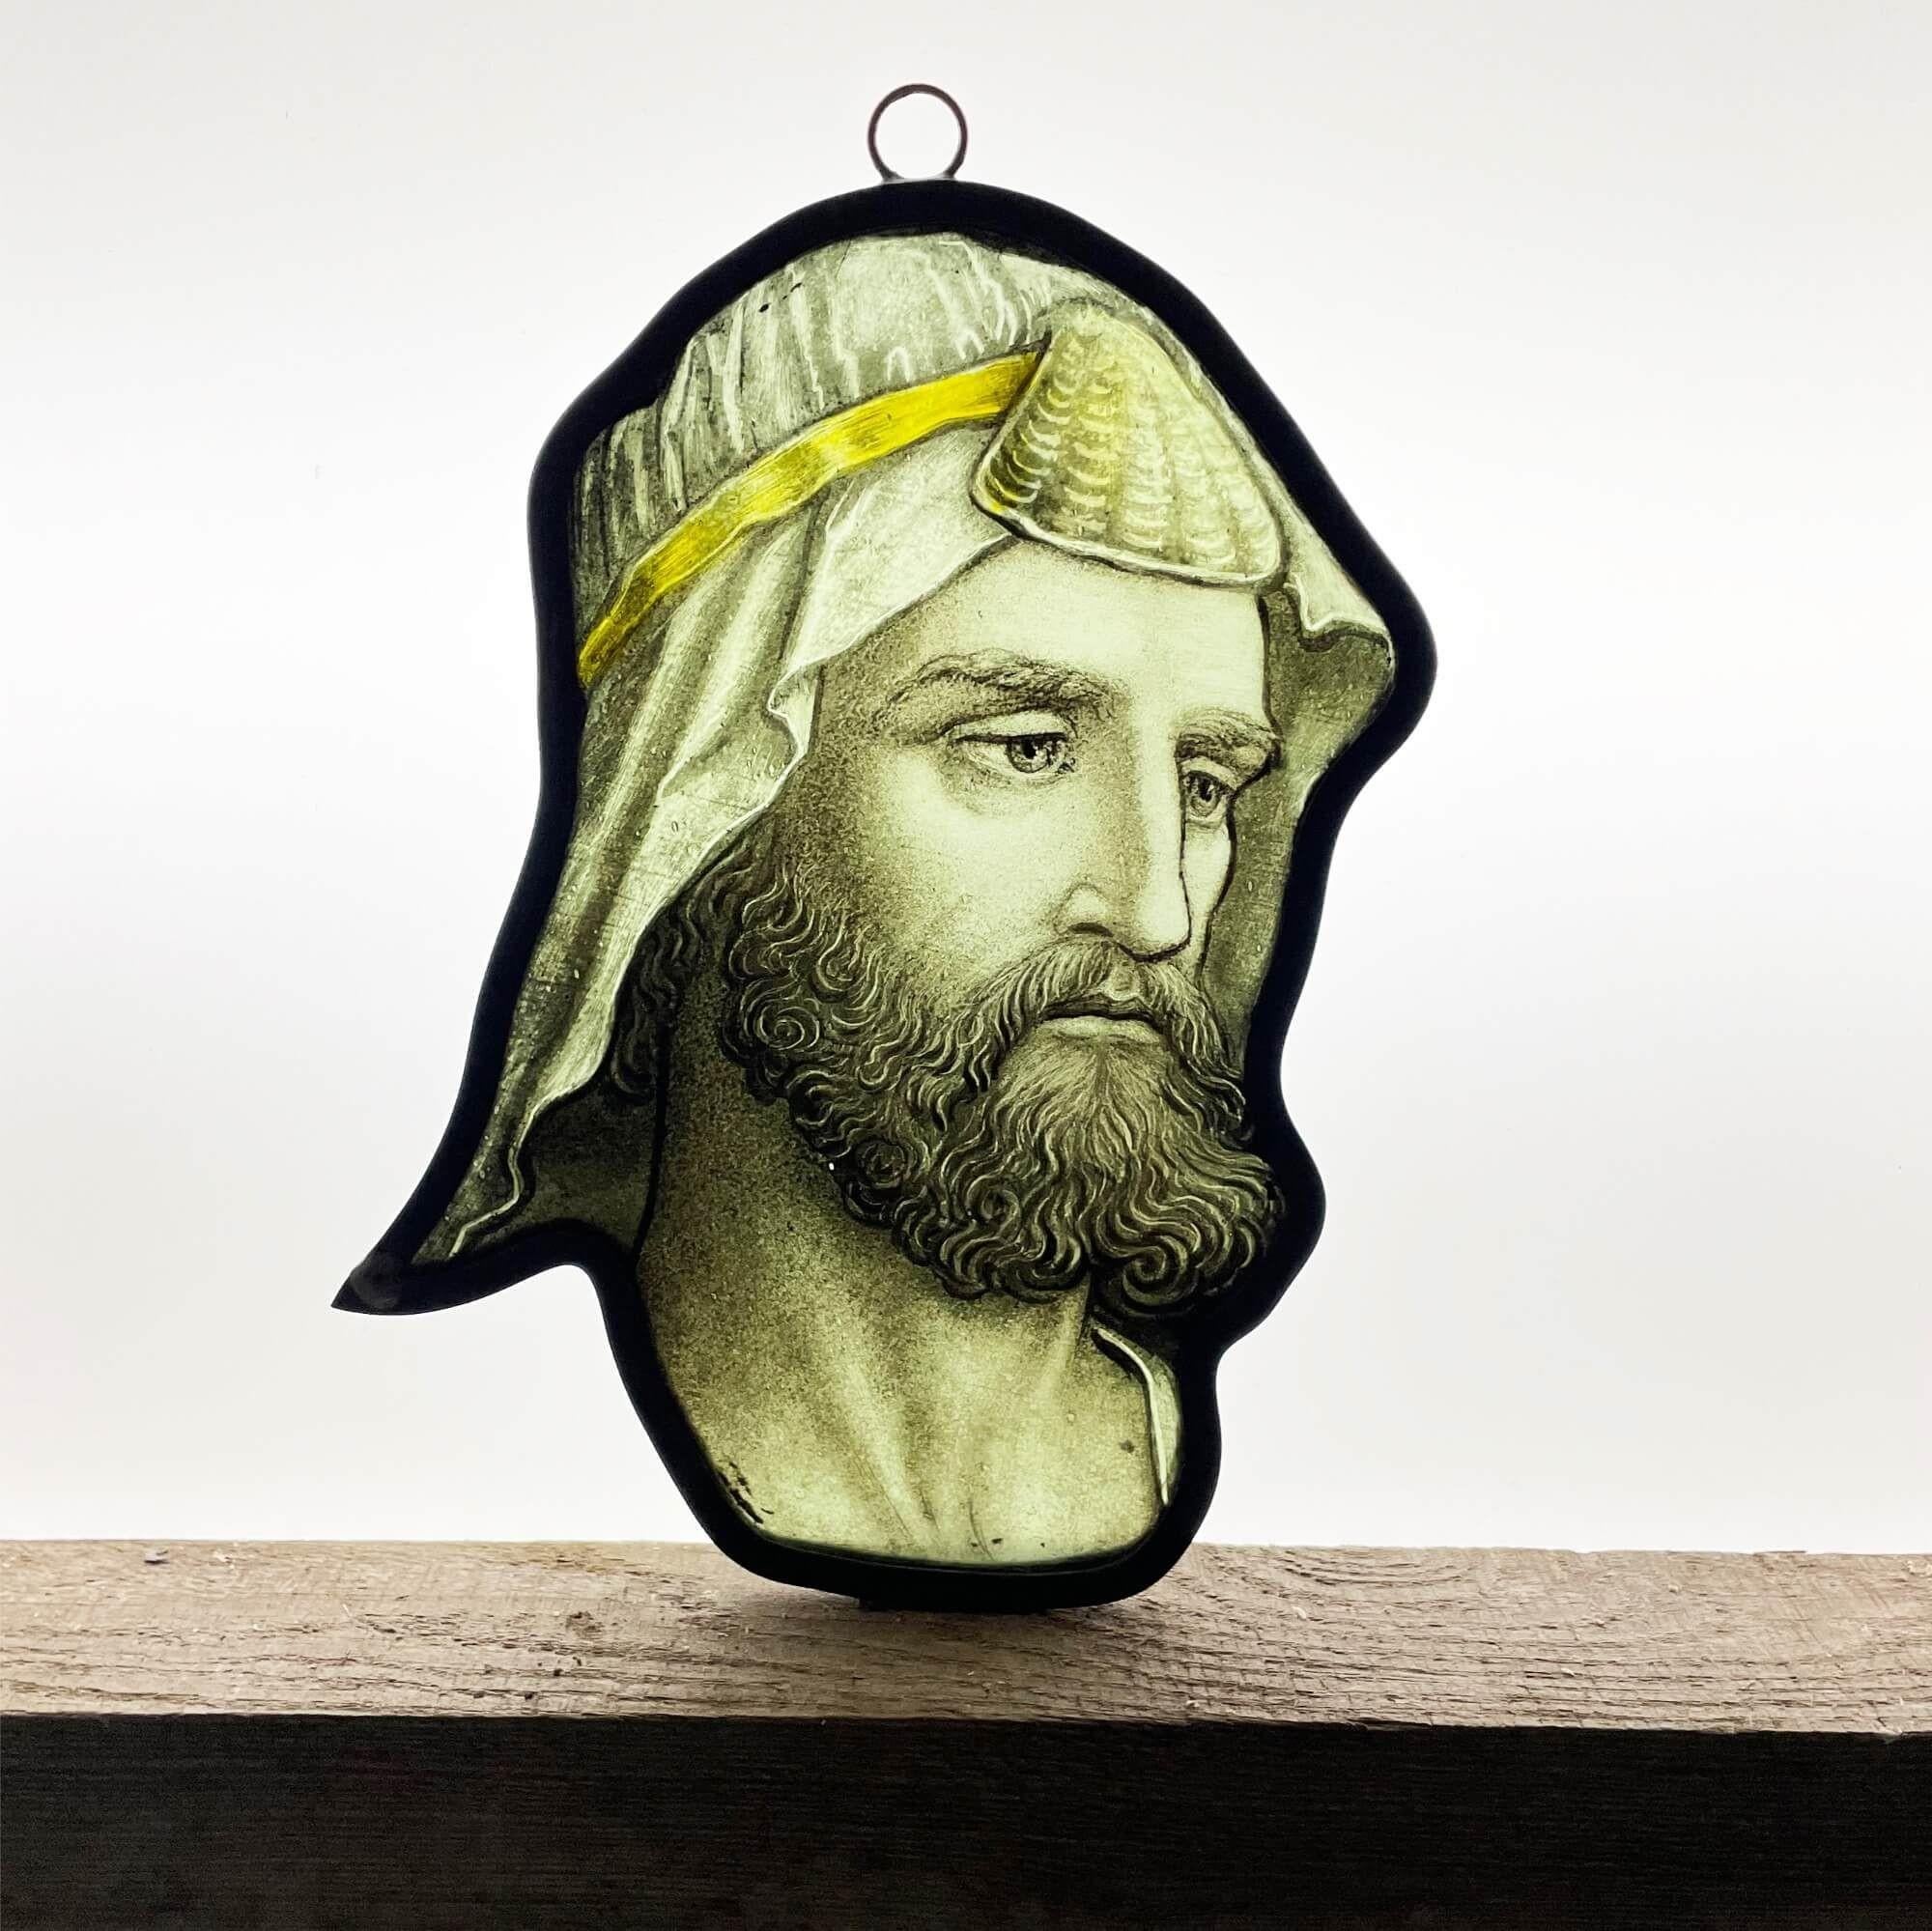 An antique stained glass panel depicting the face of a nobleman’s head dating to circa 1850. This contemplating figure is well painted in muted colours. At over 150 years old, the stained glass has stood the test of time; his beard, eyes, the